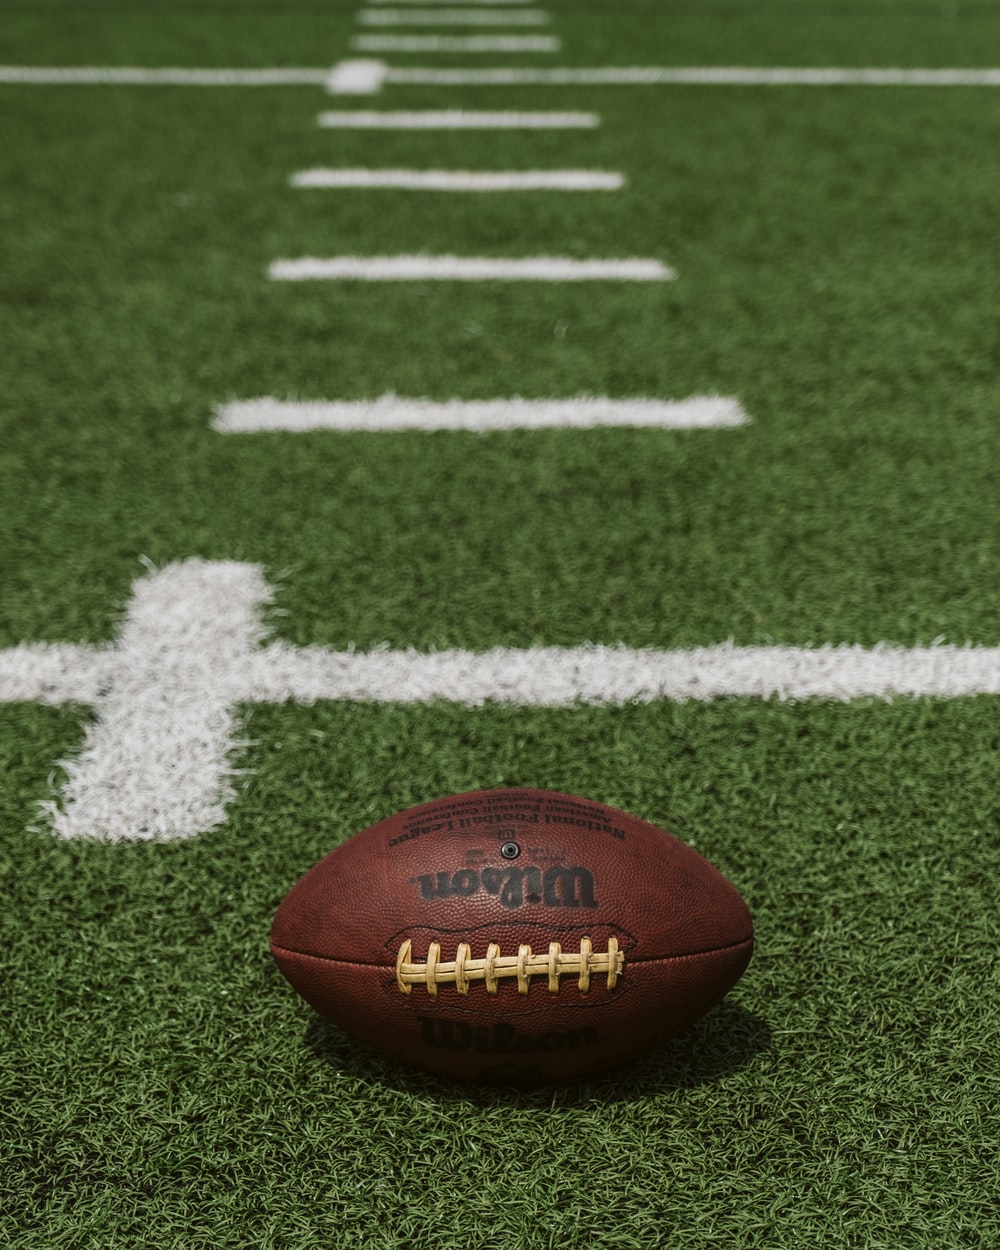 American Football Field Picture. Download Free Image